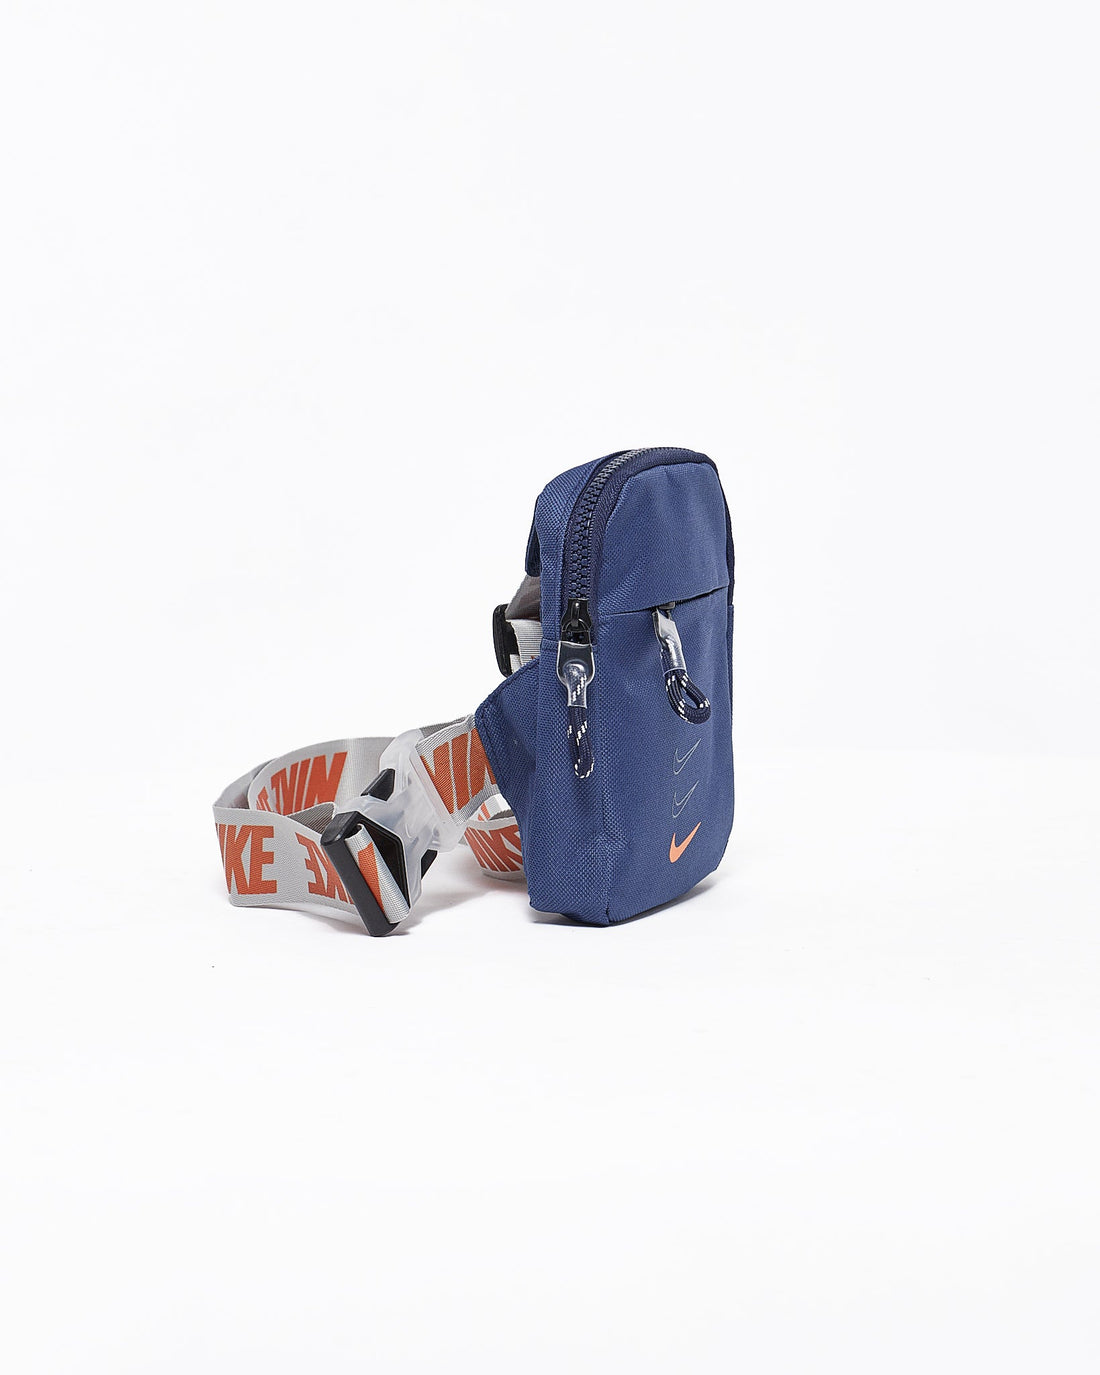 MOI OUTFIT-Triple Swooh Printed Mini Unisex Sling Bag 12.90